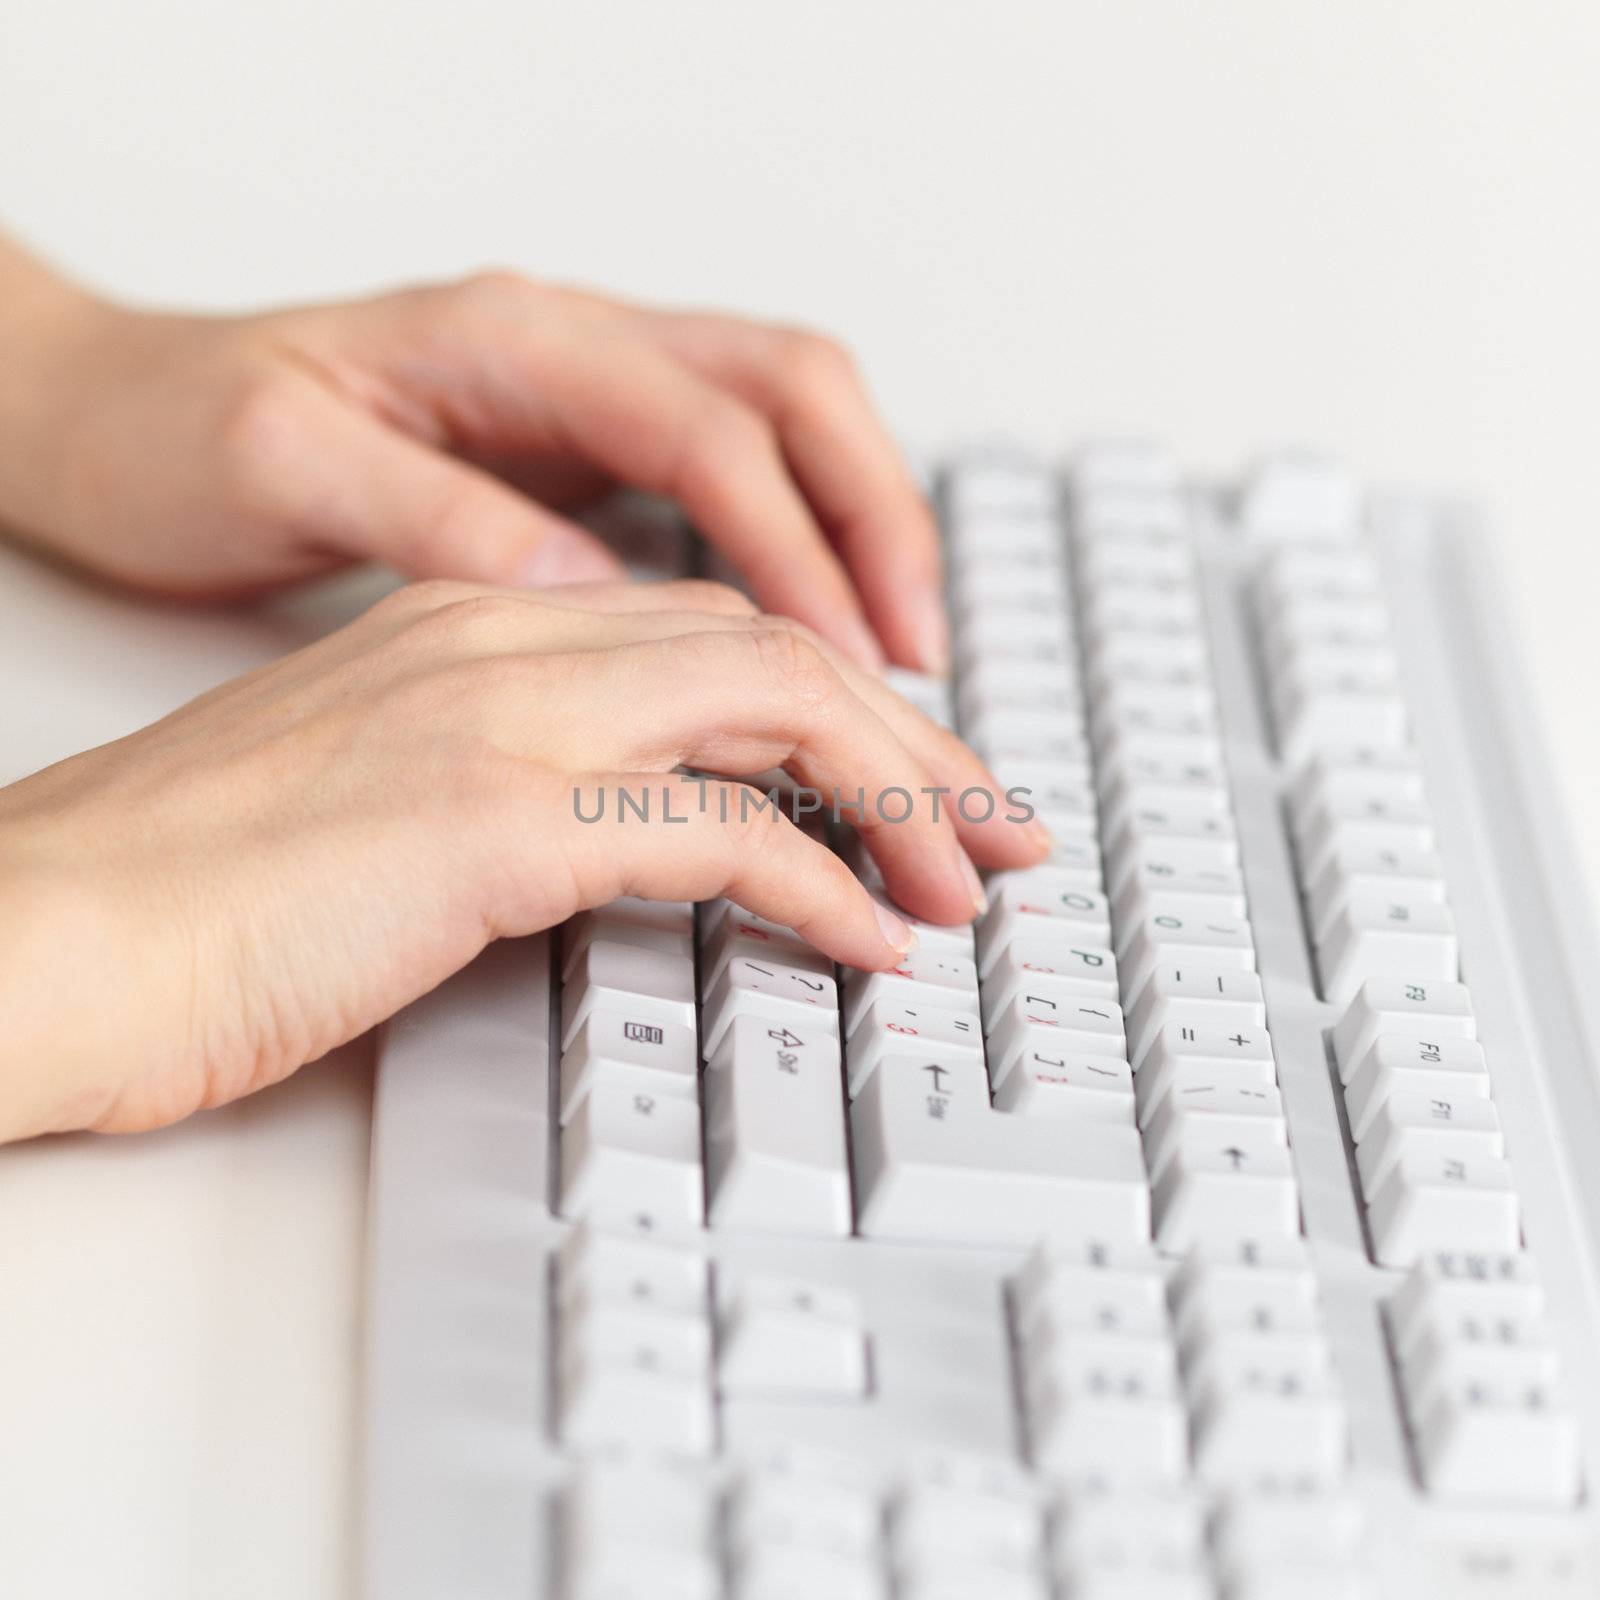 Female hands work on the computer keyboard close up